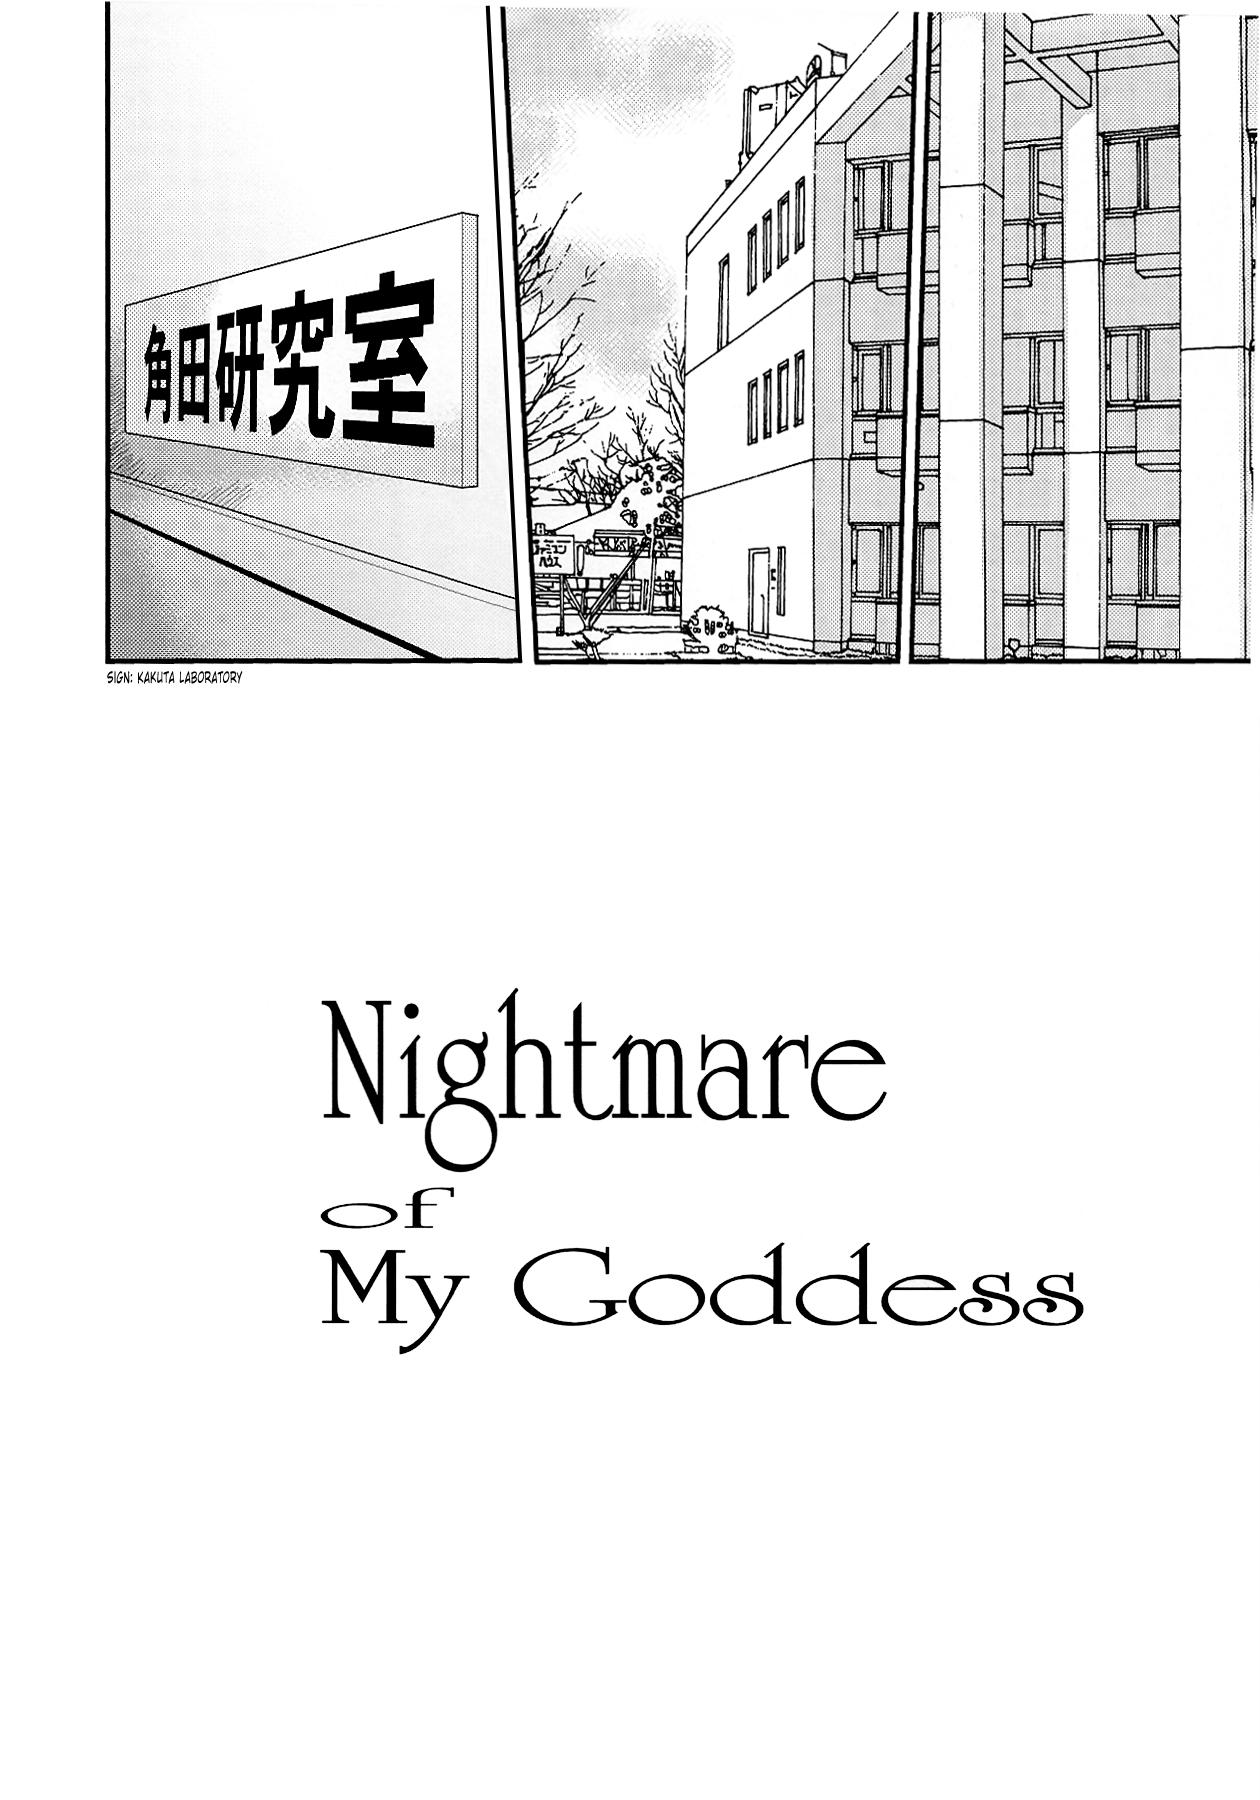 From Nightmare of My Goddess Vol.12 - Ah my goddess Big Pussy - Page 6